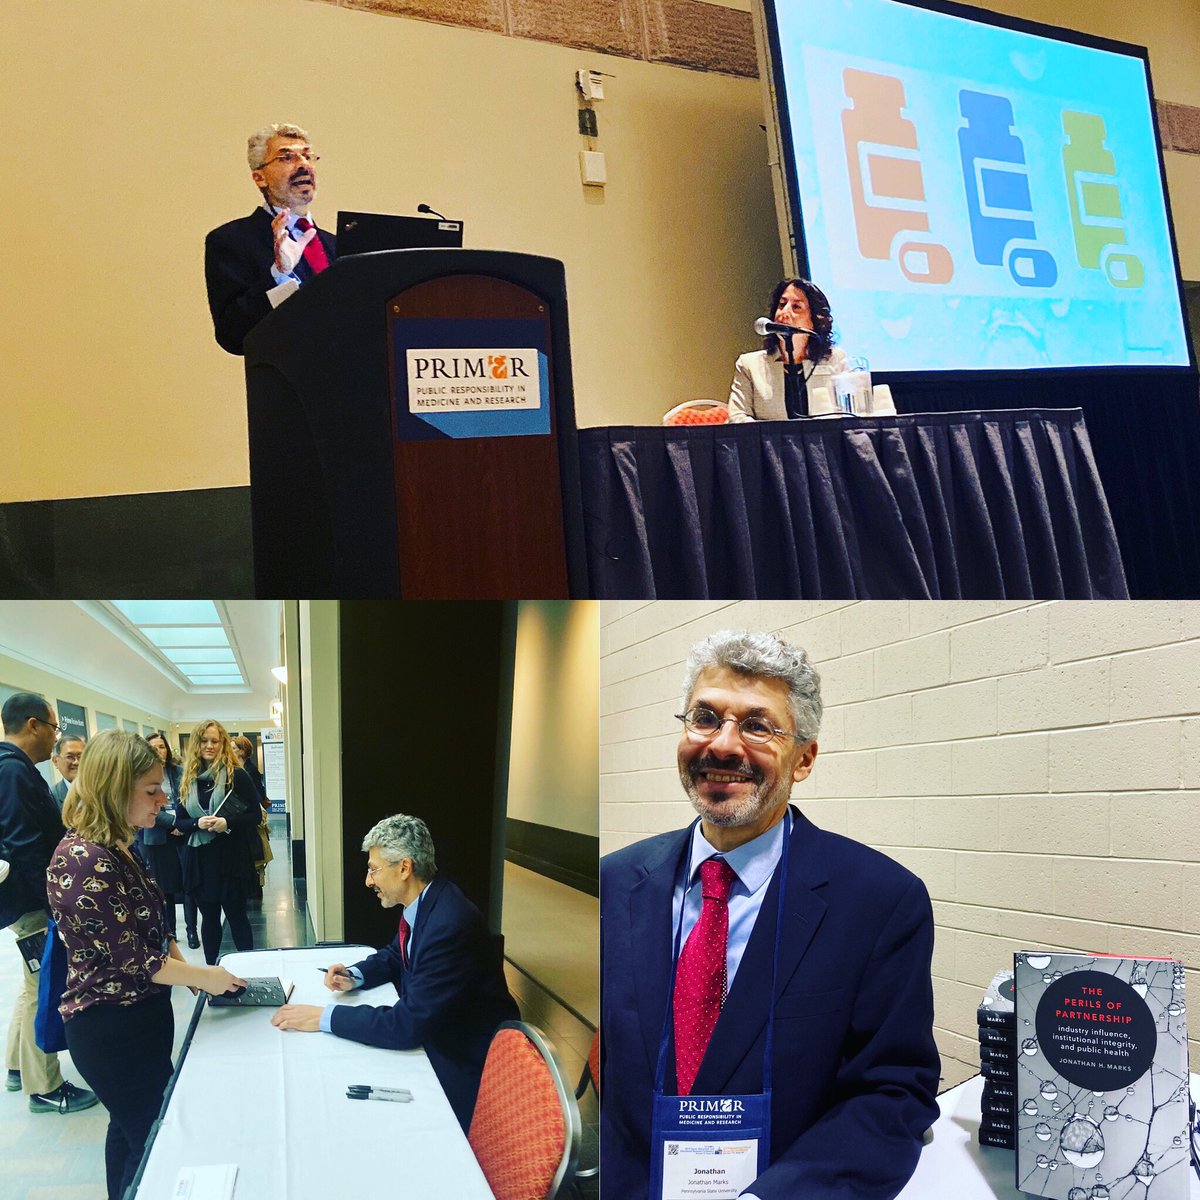 Congrats to Bioethics Program Director Jonathan H. Marks @EthicsLawPolicy on a fabulous luncheon presentation and book signing at PRIM&R #AER19 on “The Perils of Partnership”!
#bioethics #psubioethics #ethics #corporateinfluence #perilsofpartnership #bioethicswithoutboundaries